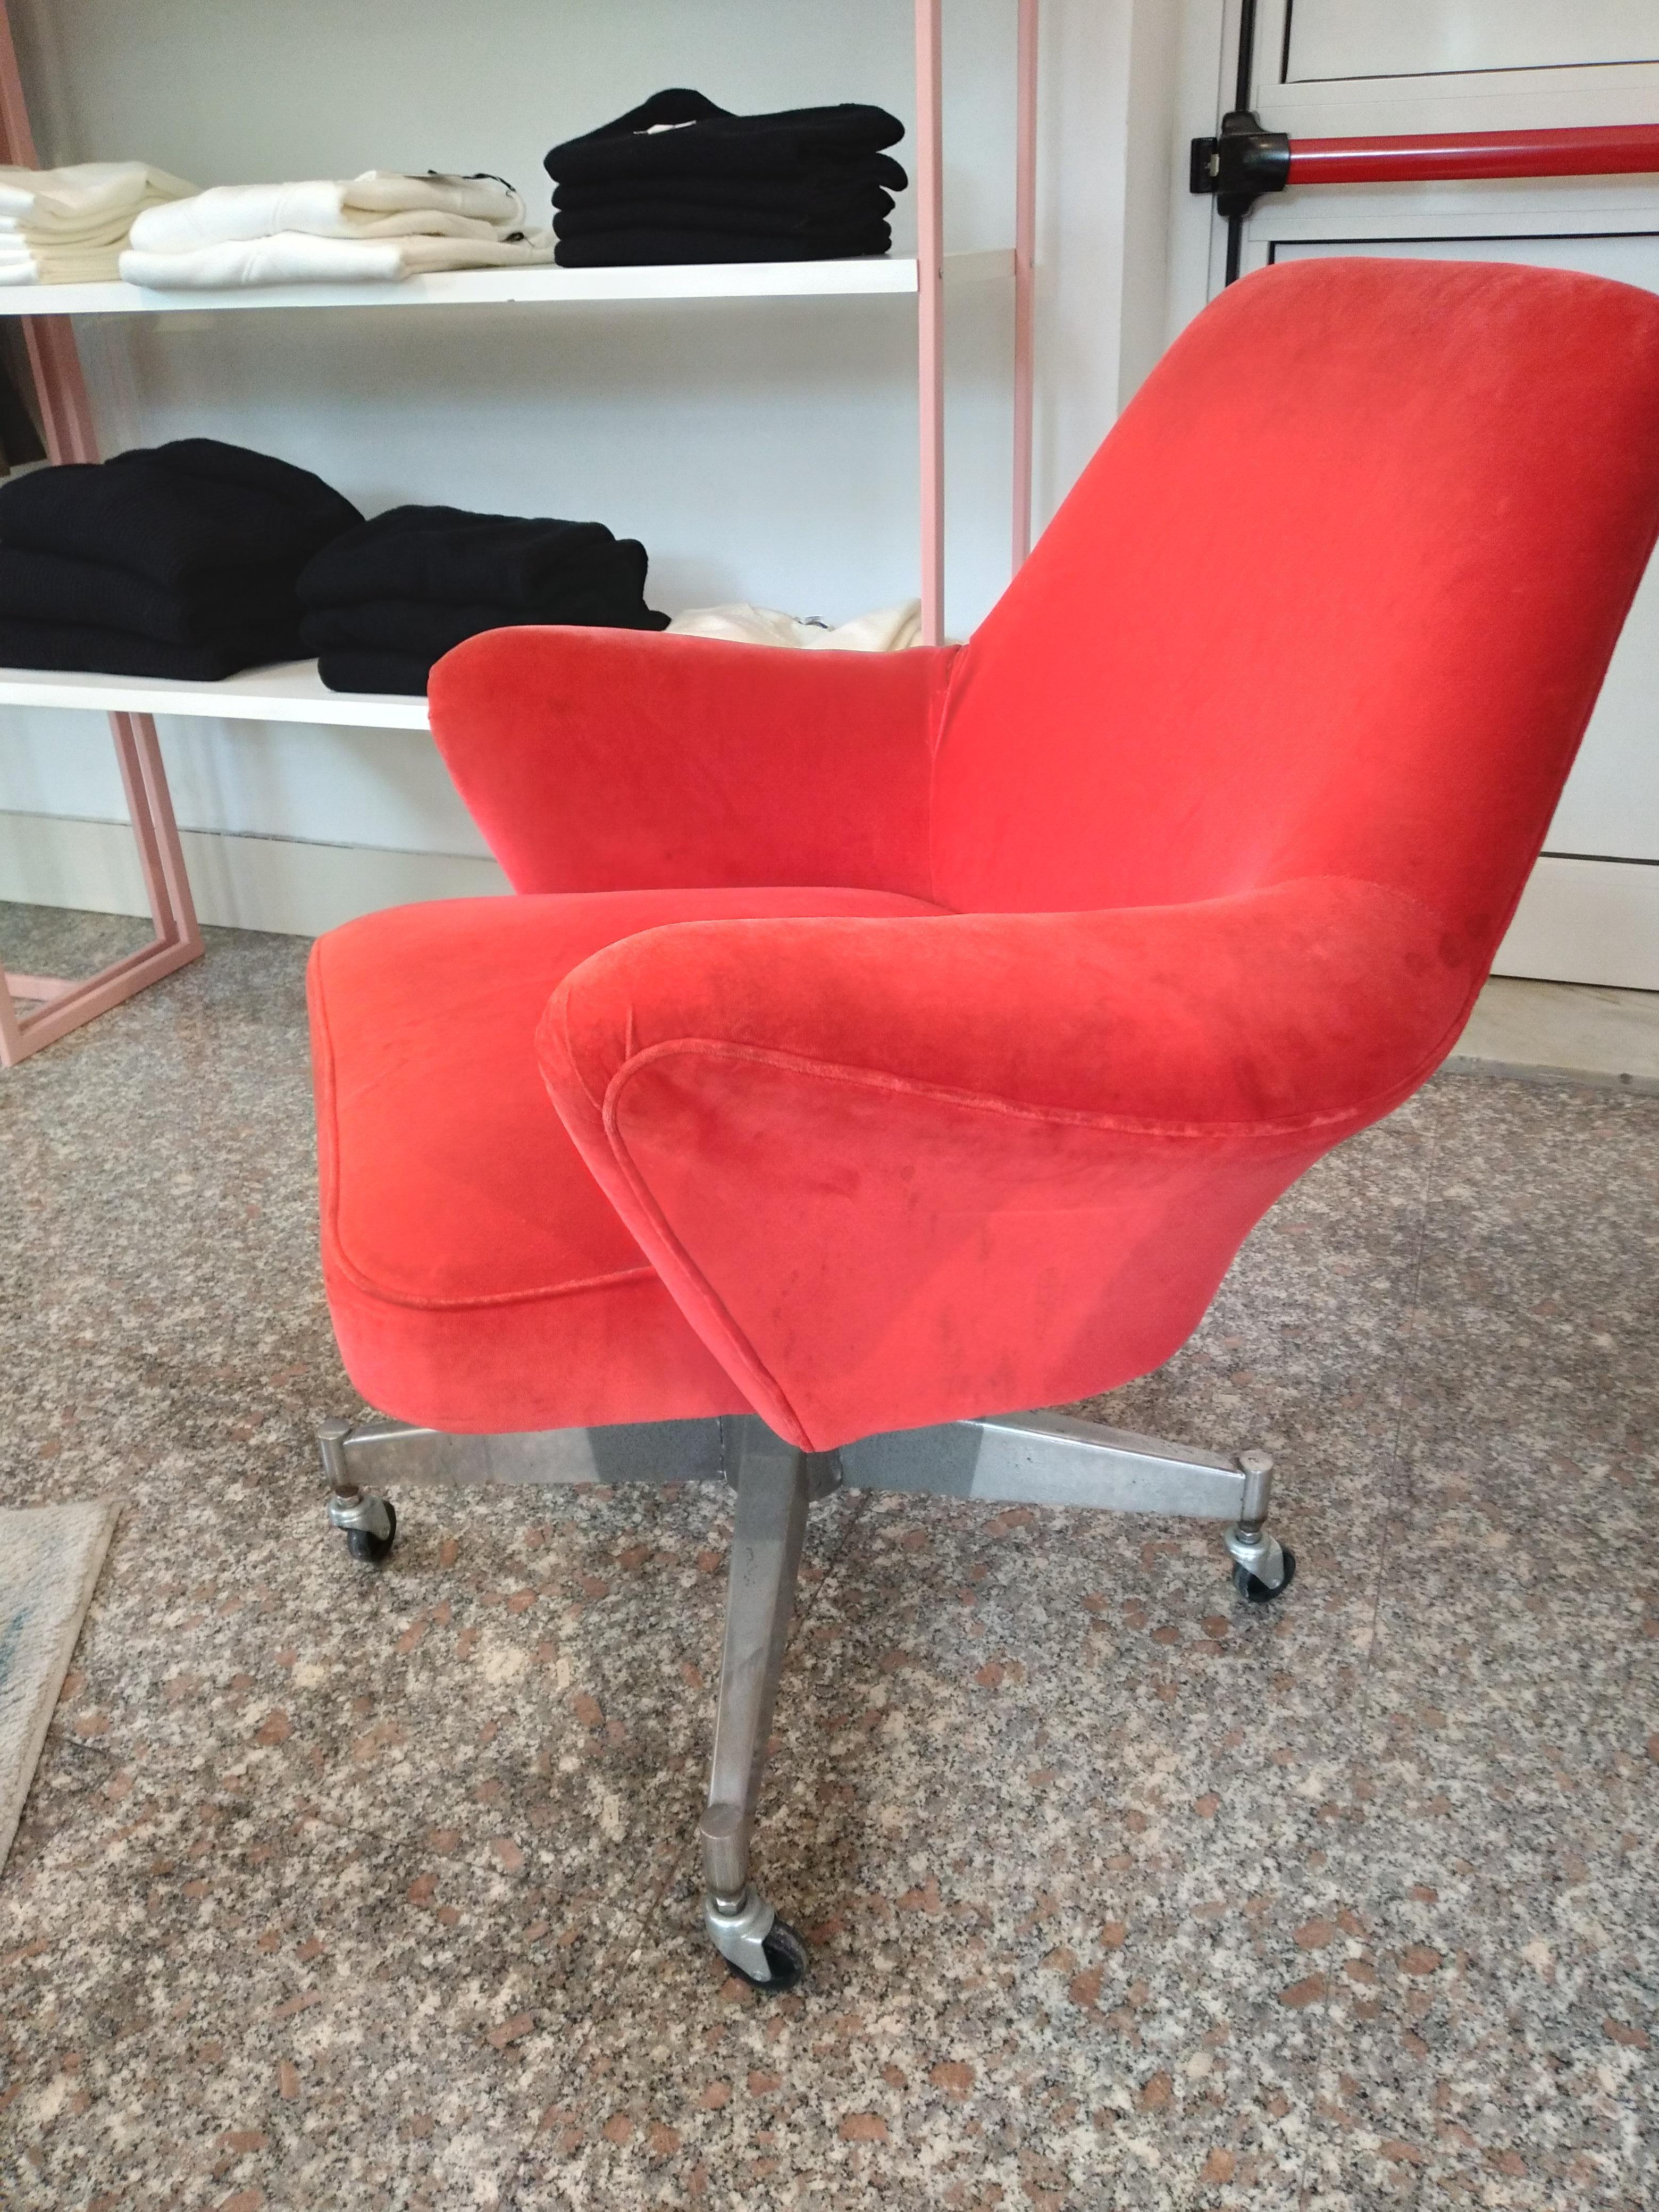 Armchairs by Osvaldo Borsani Italy 1960s 
The armhairs has the whelles and is swivel the padden part retains the original Red Velvet and is mounted in a revolving metal pedestal with wheels .
Very confortable.
I am available for any information.